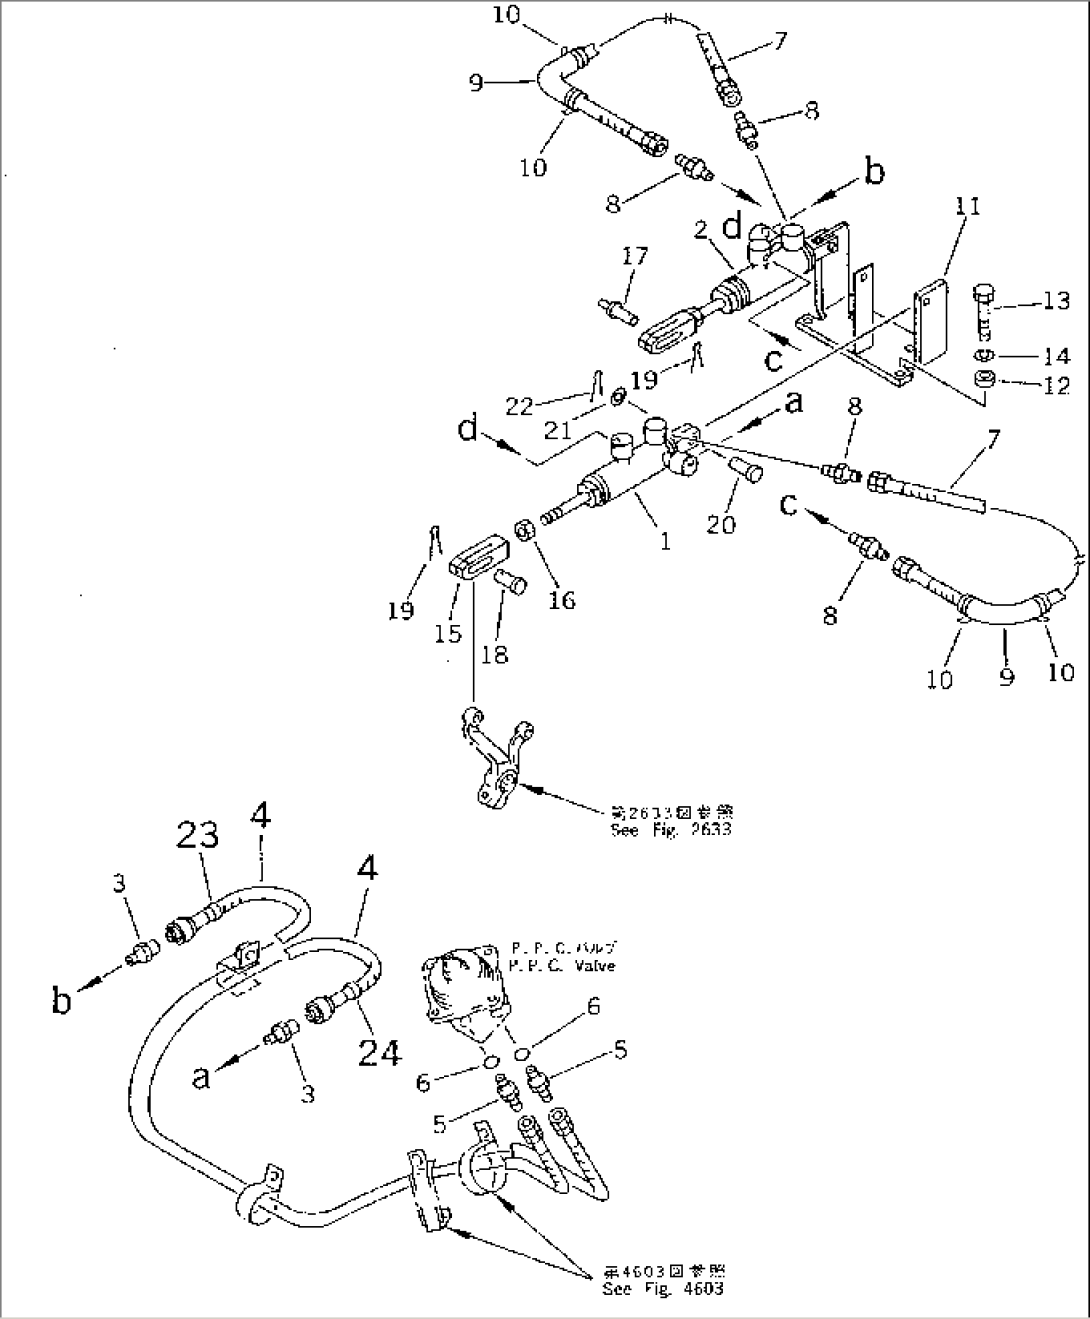 STEERING PIPING (BRAKE CYLINDER LINE) (FOR MONO LEVER STEERING)